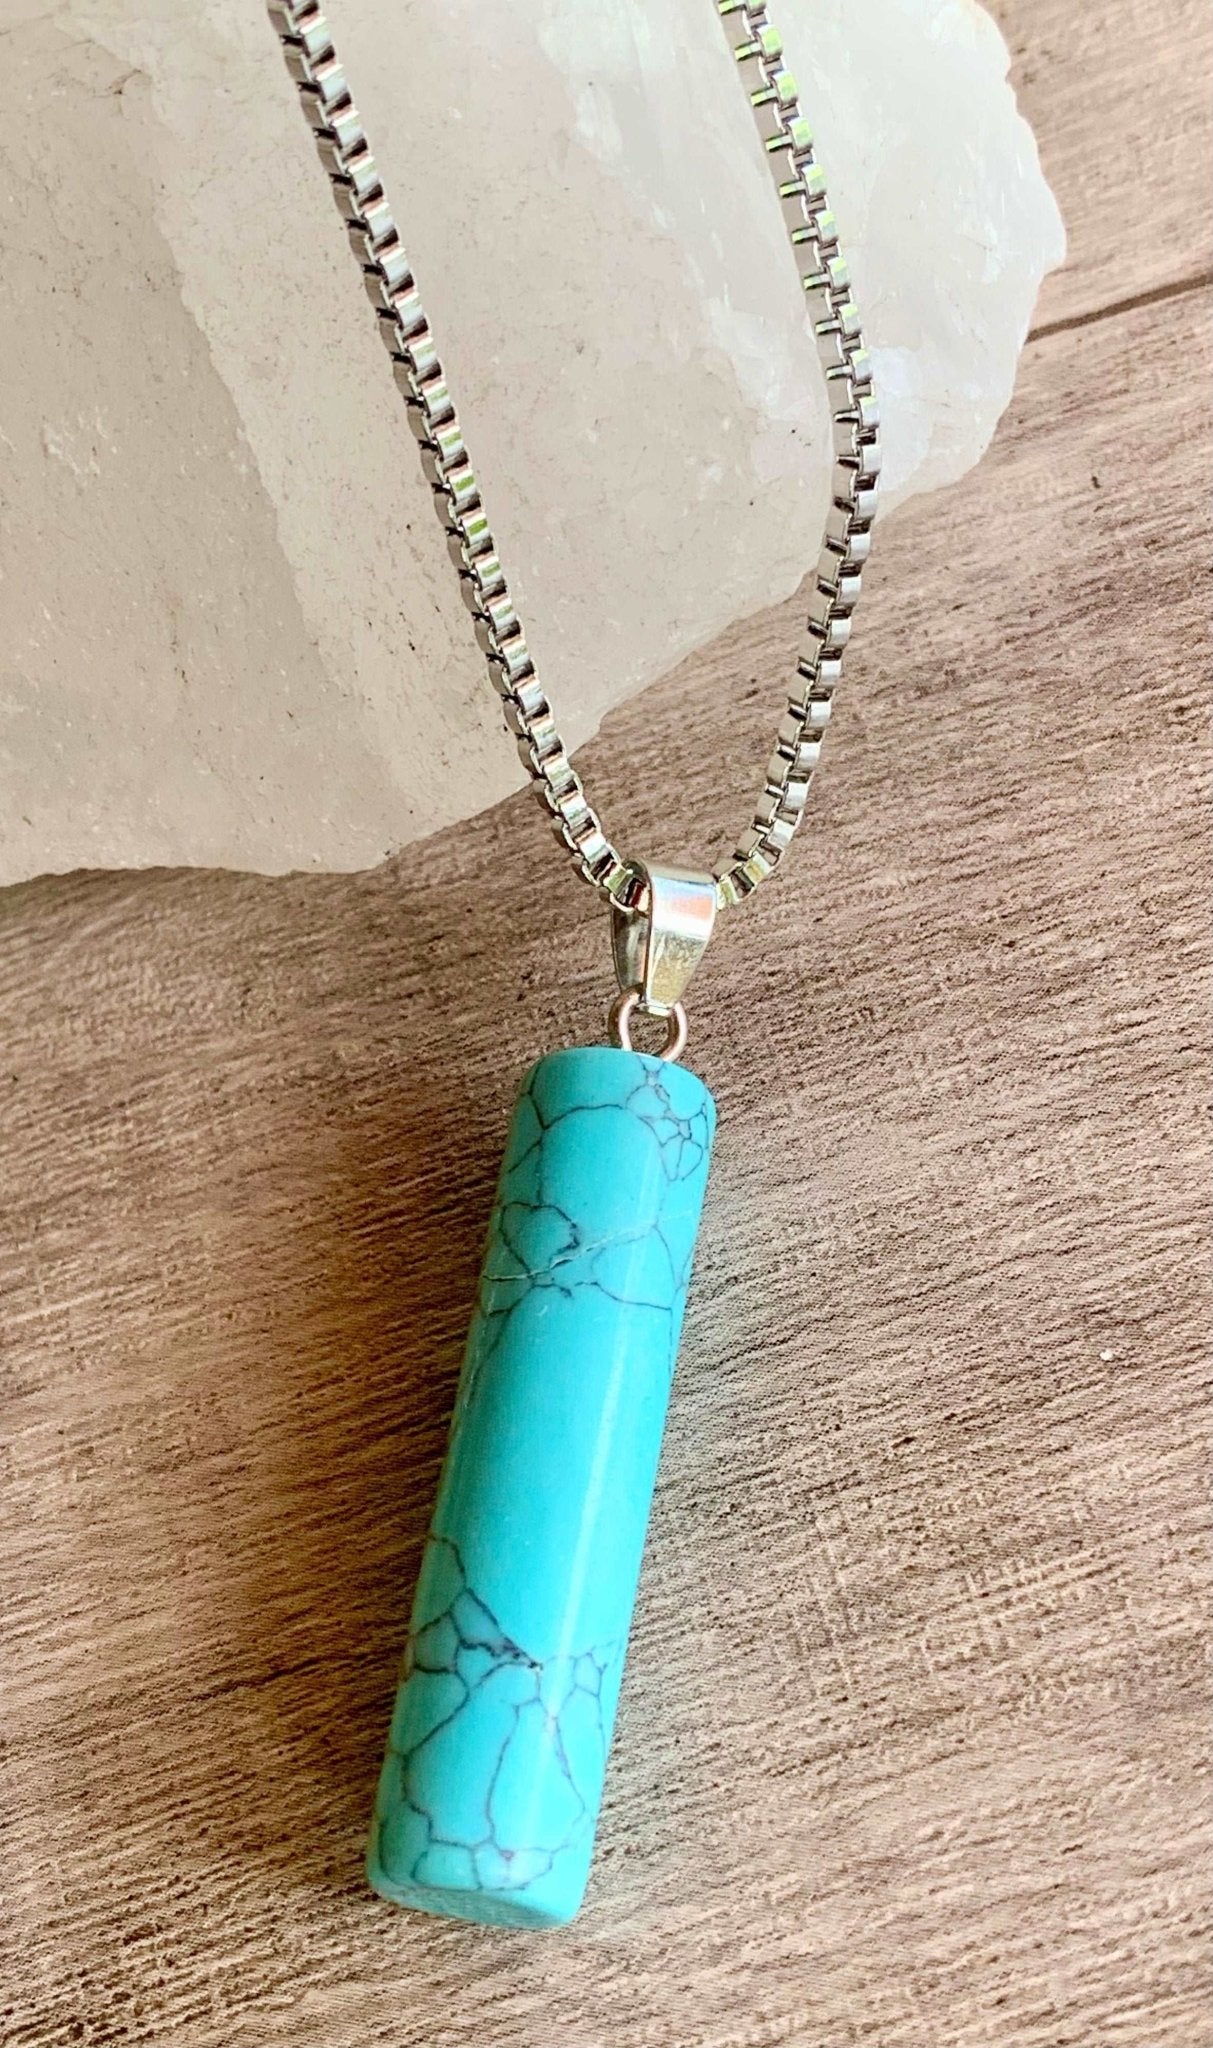 Cassidy Handmade Turquoise Cylinder Pendant on a Stainless Steel Box Chain Necklace - Born Mystics